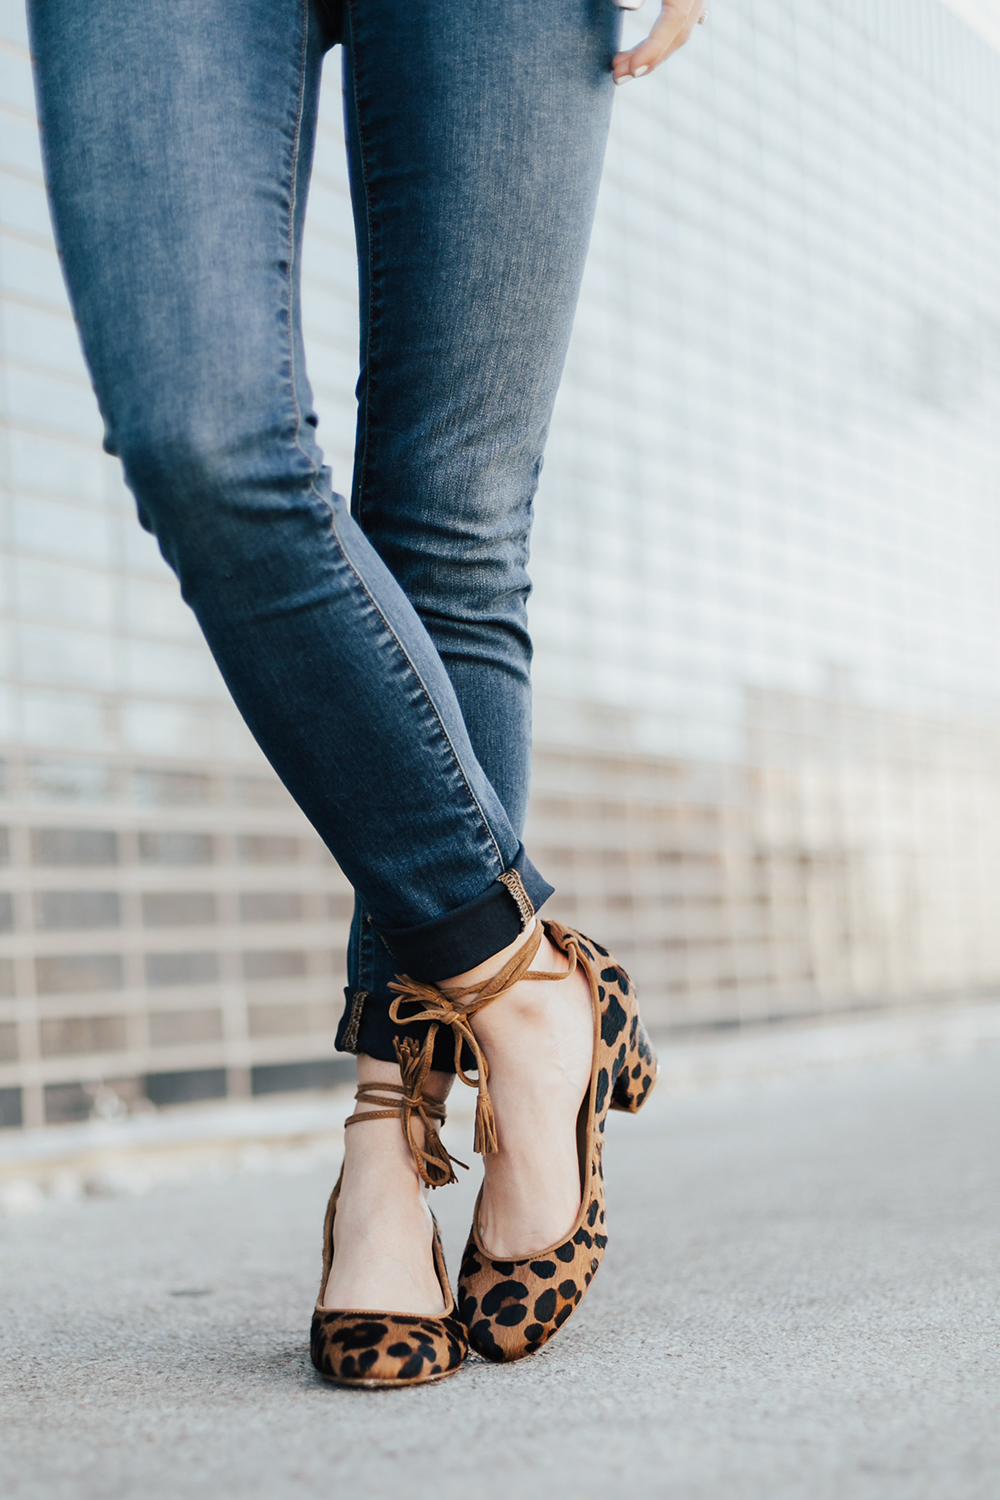 Leopard Lace-Up Block Heels - LivvyLand | Austin Fashion and Style Blogger